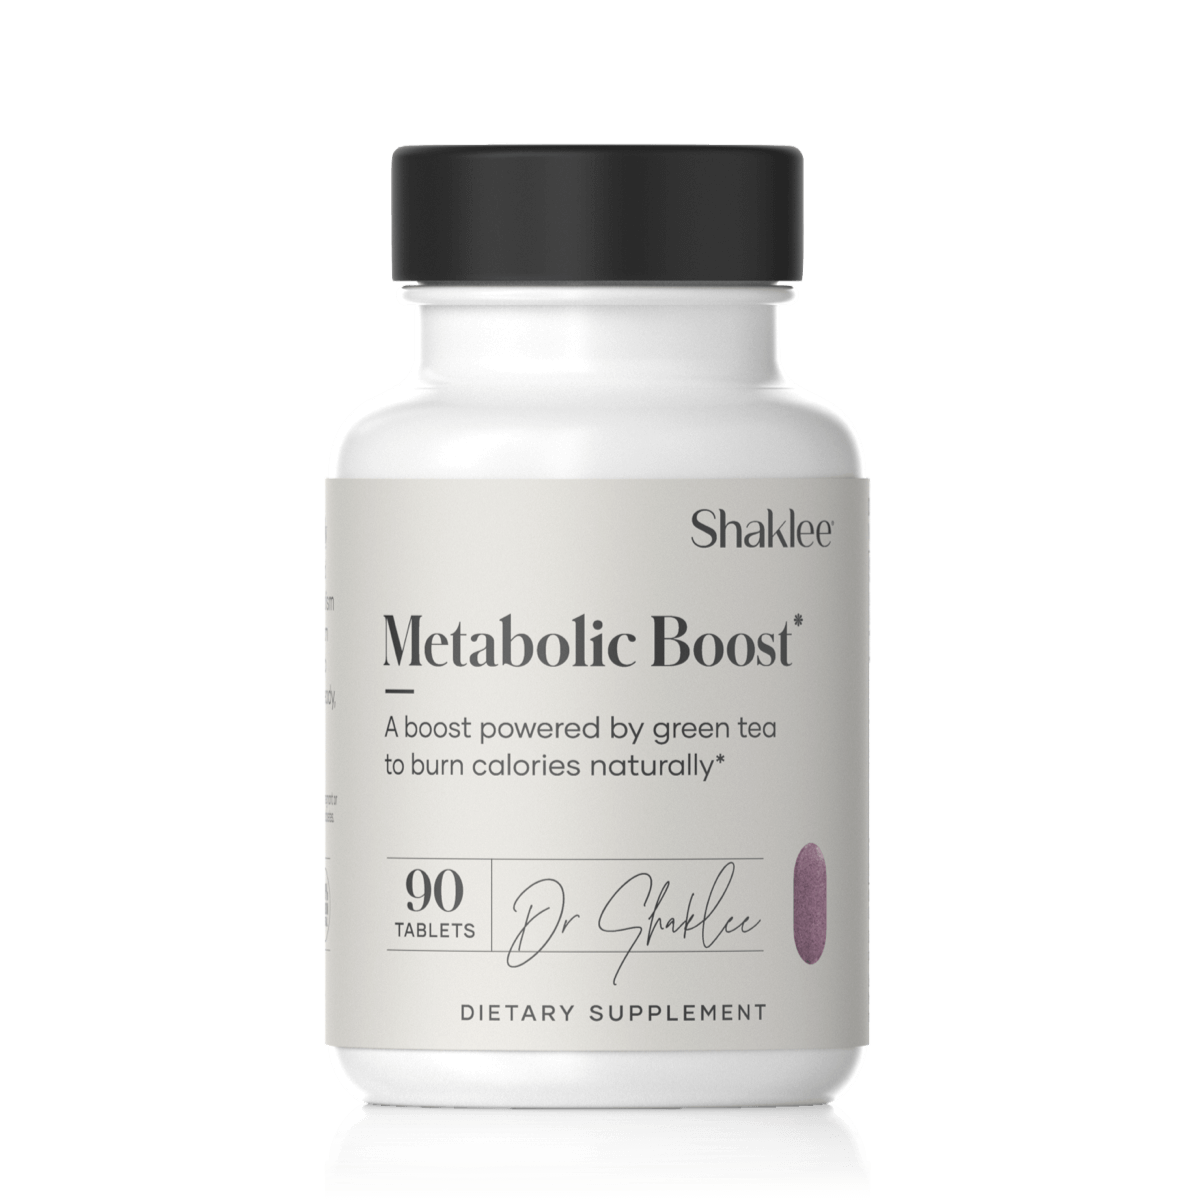 180 Metabolic Boost* Supplement with Green Tea | Shaklee